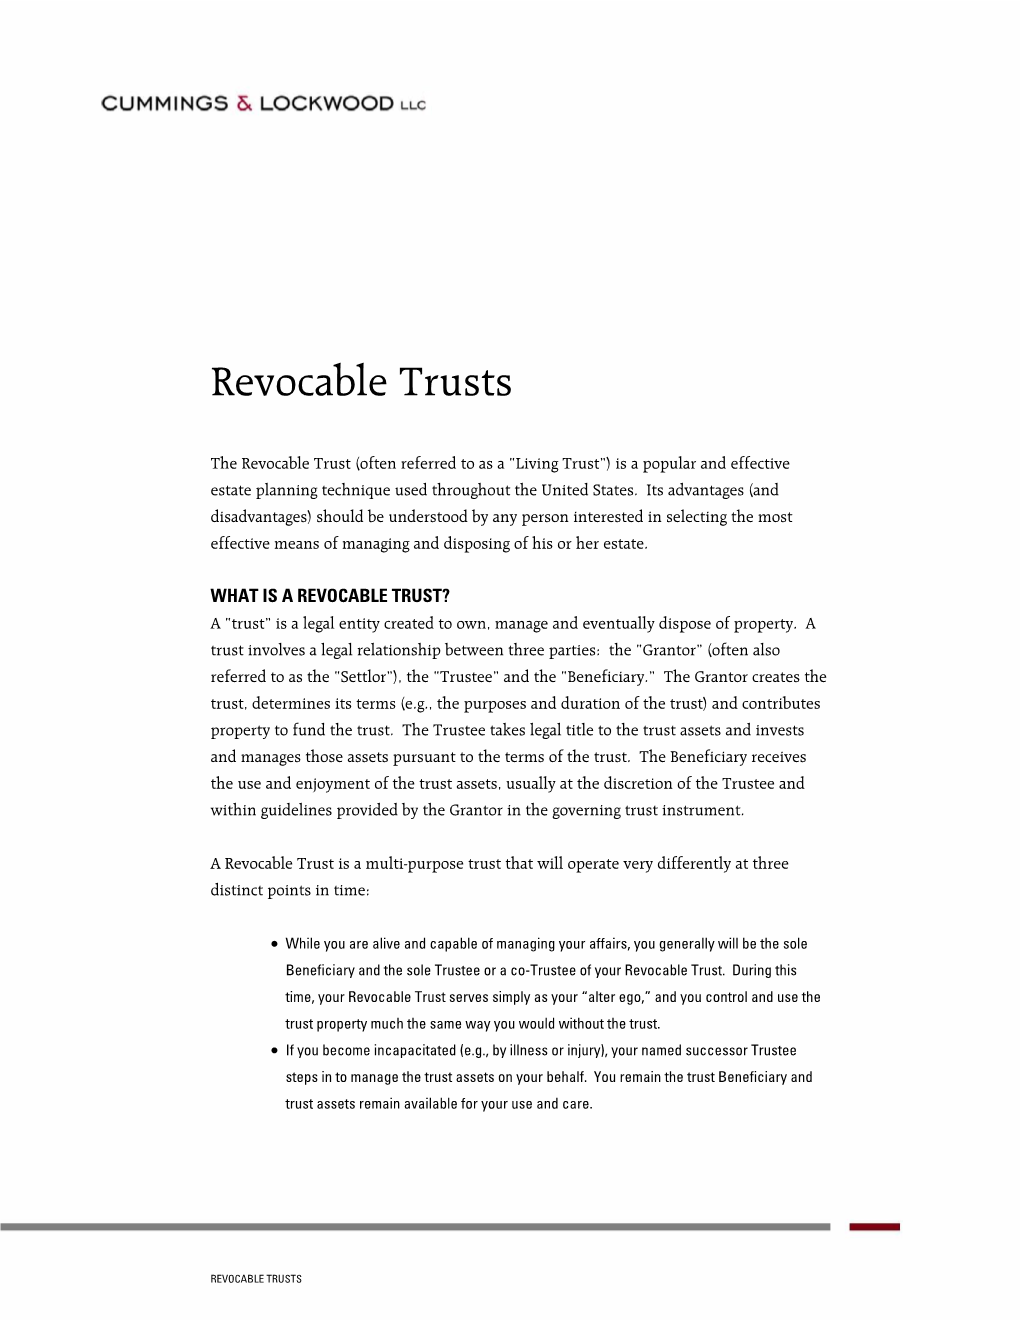 Revocable Trusts